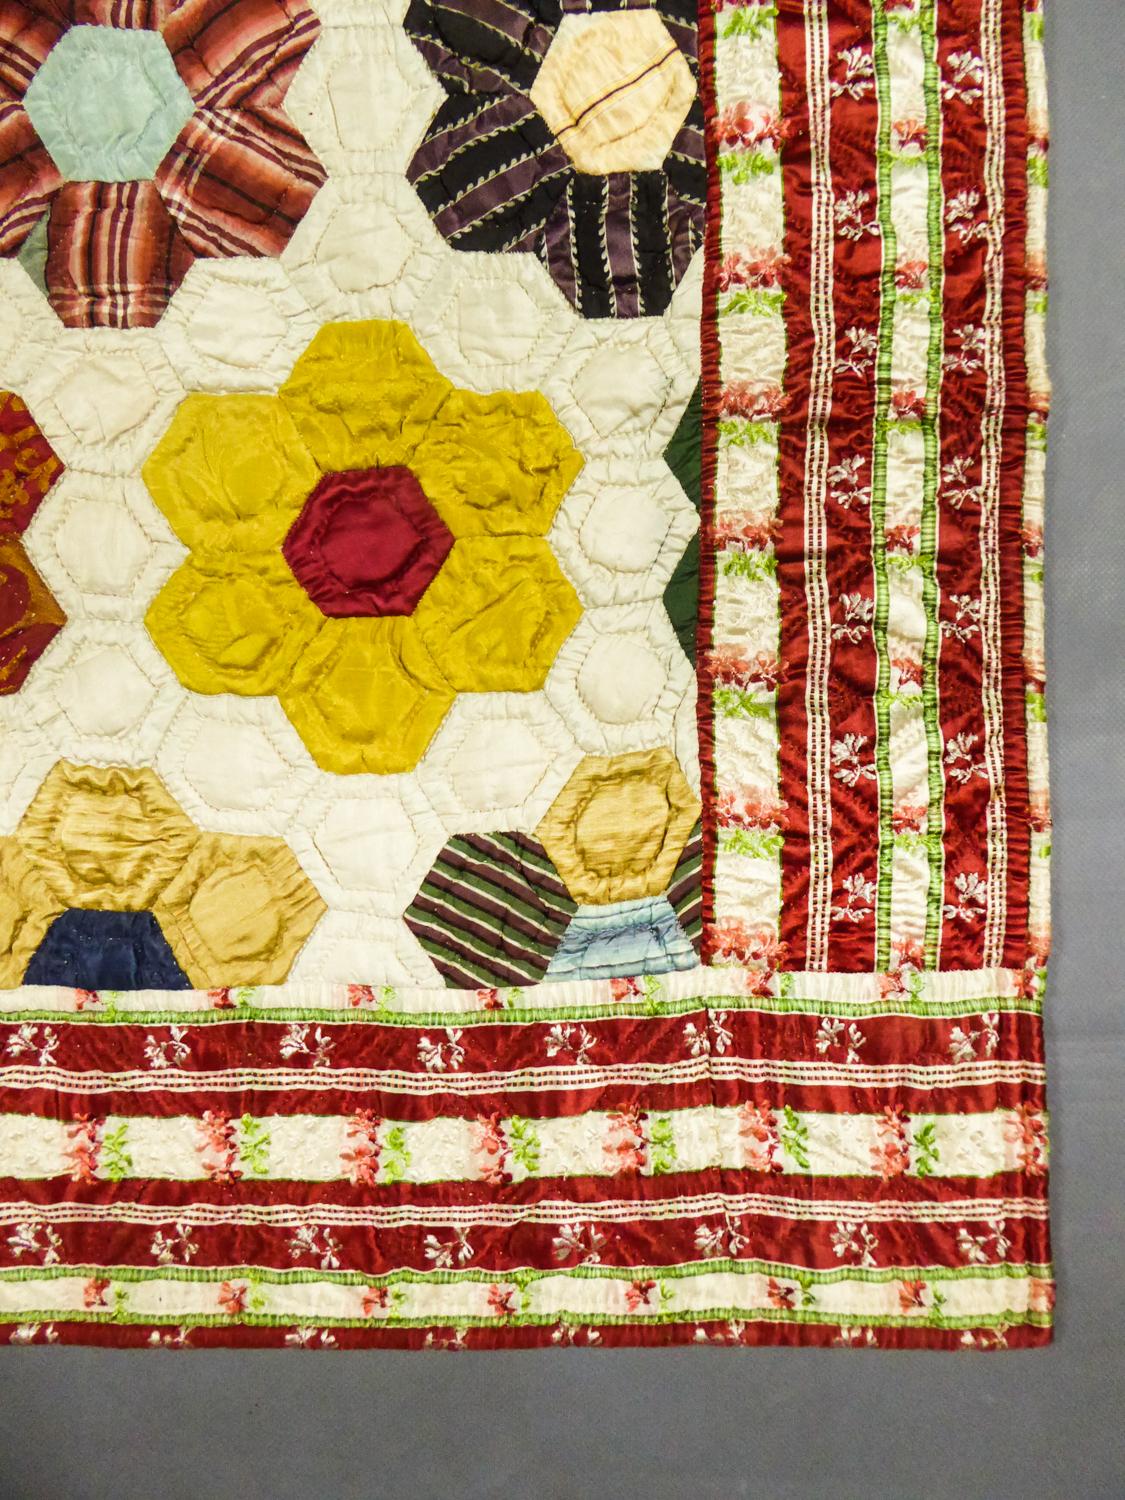 18th century quilts